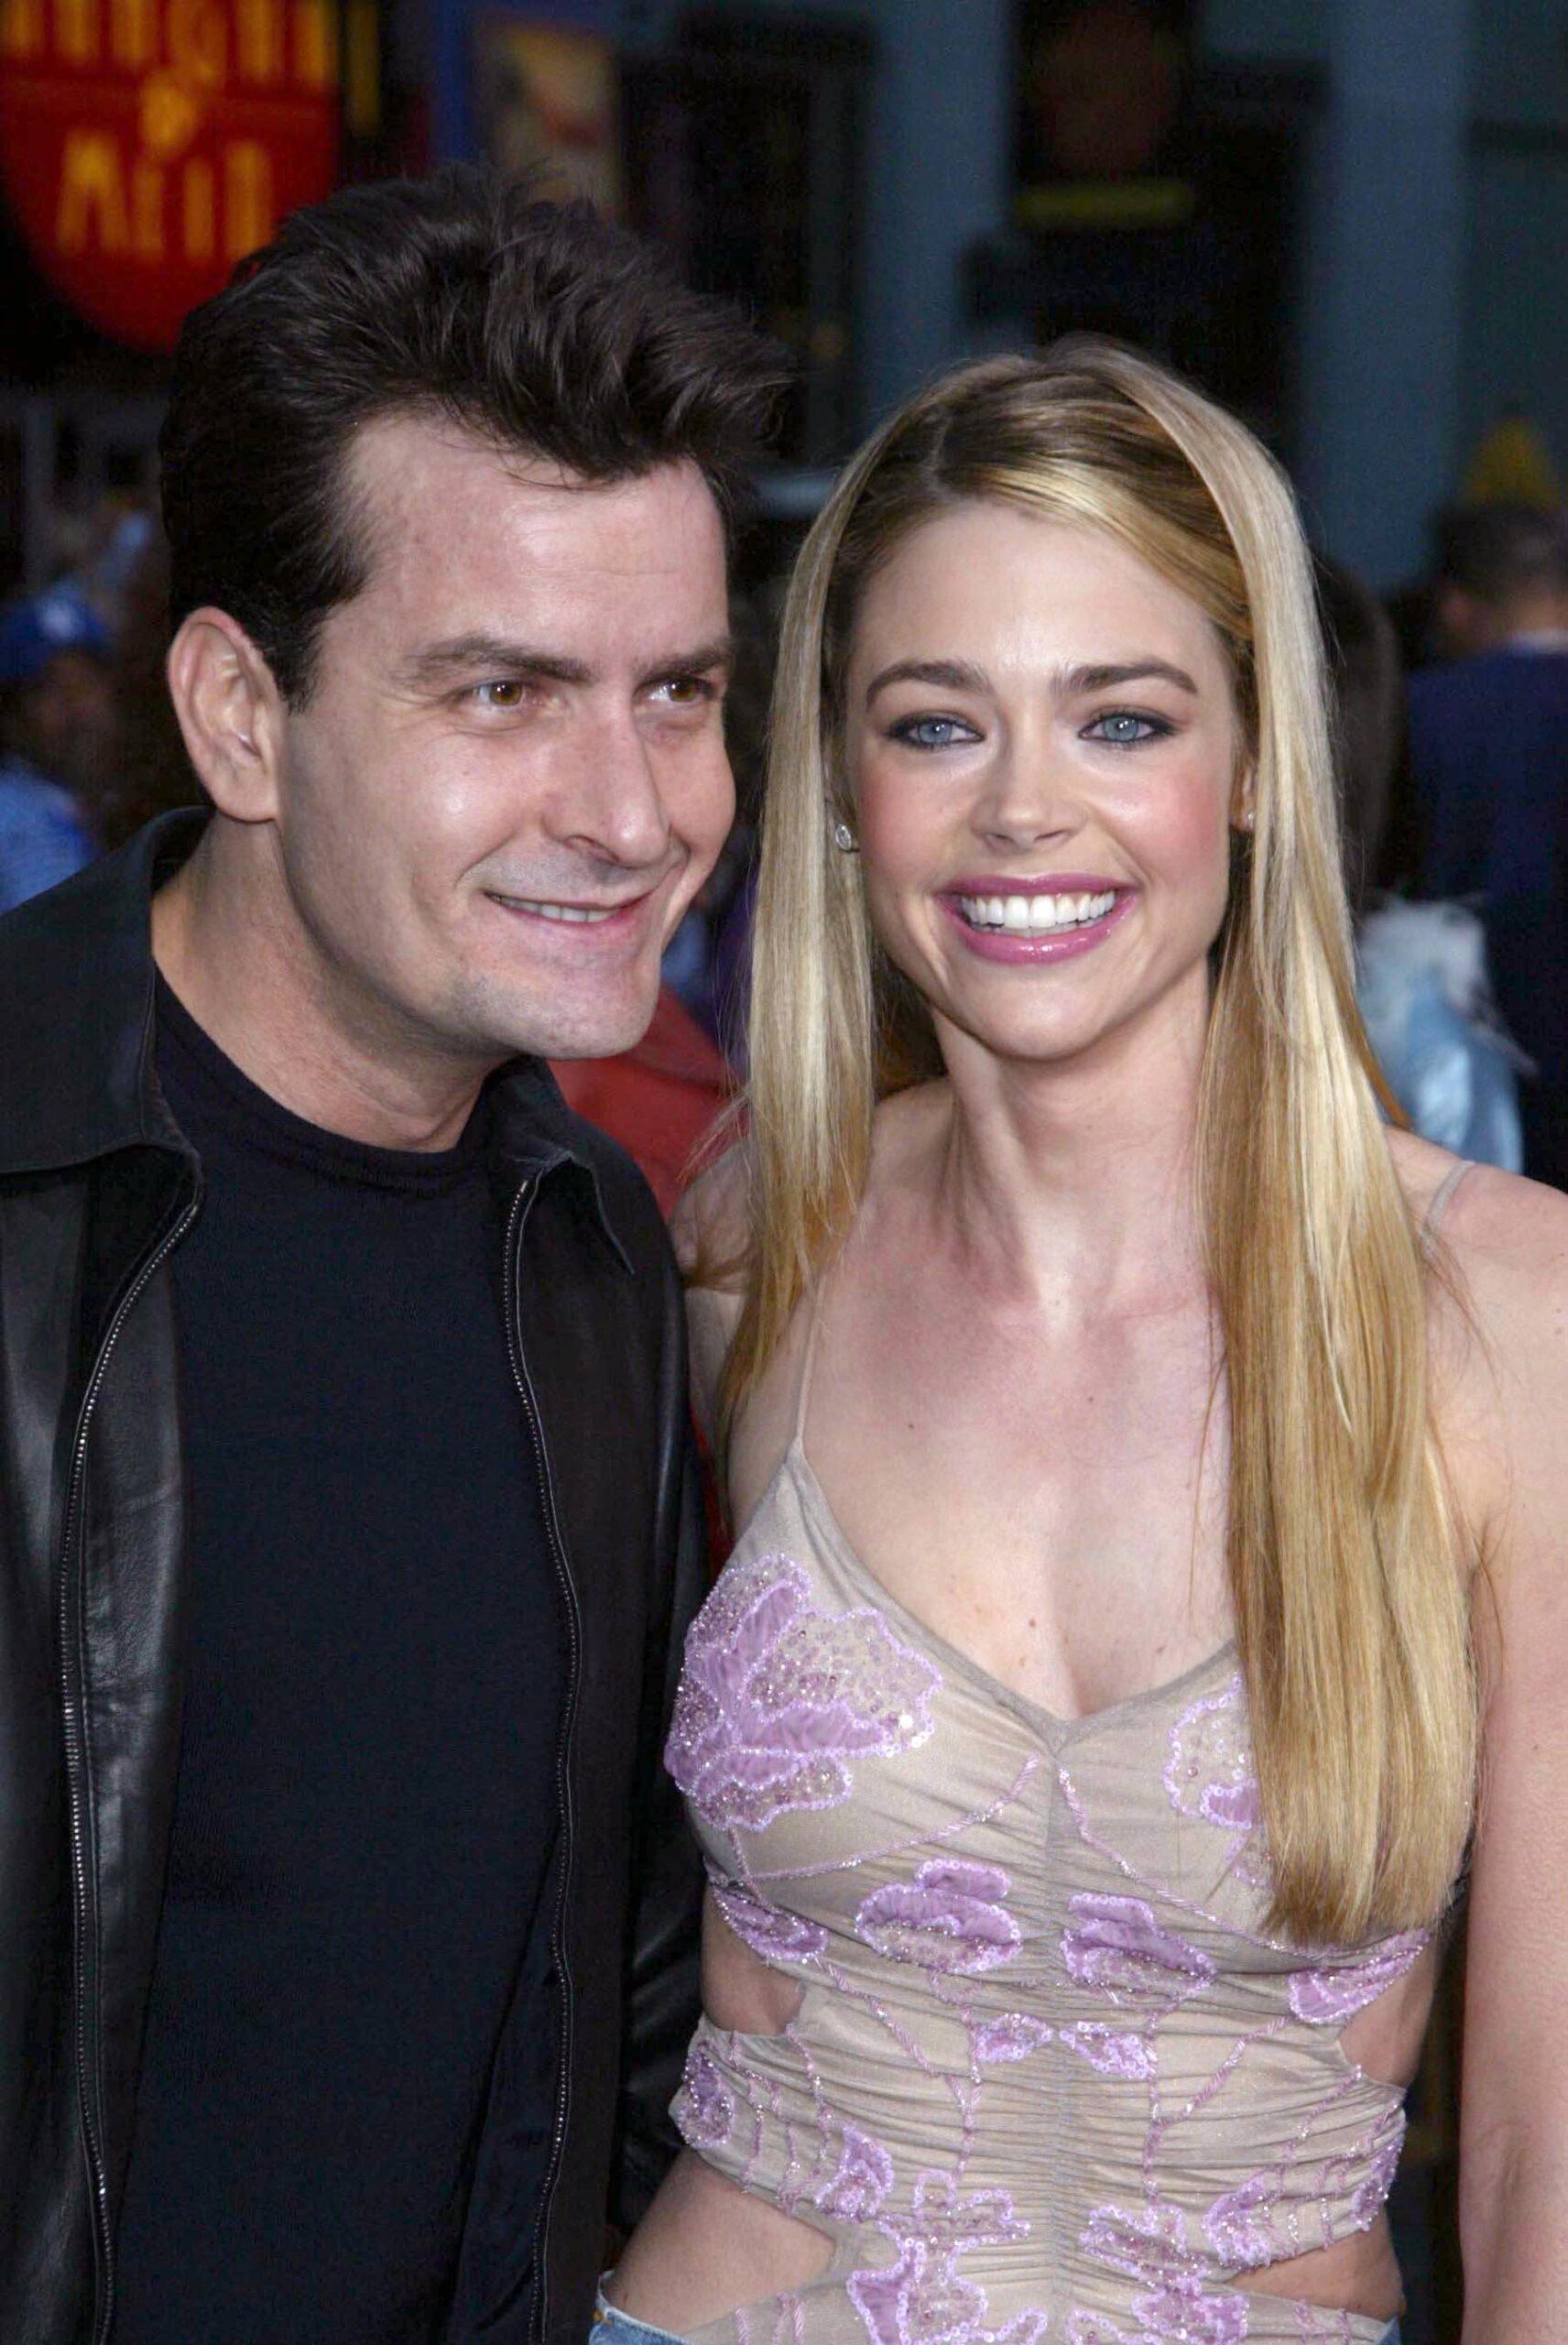 Charlie Sheen Scores BIG In Court, Owes Denise Richards Zero In Child Support